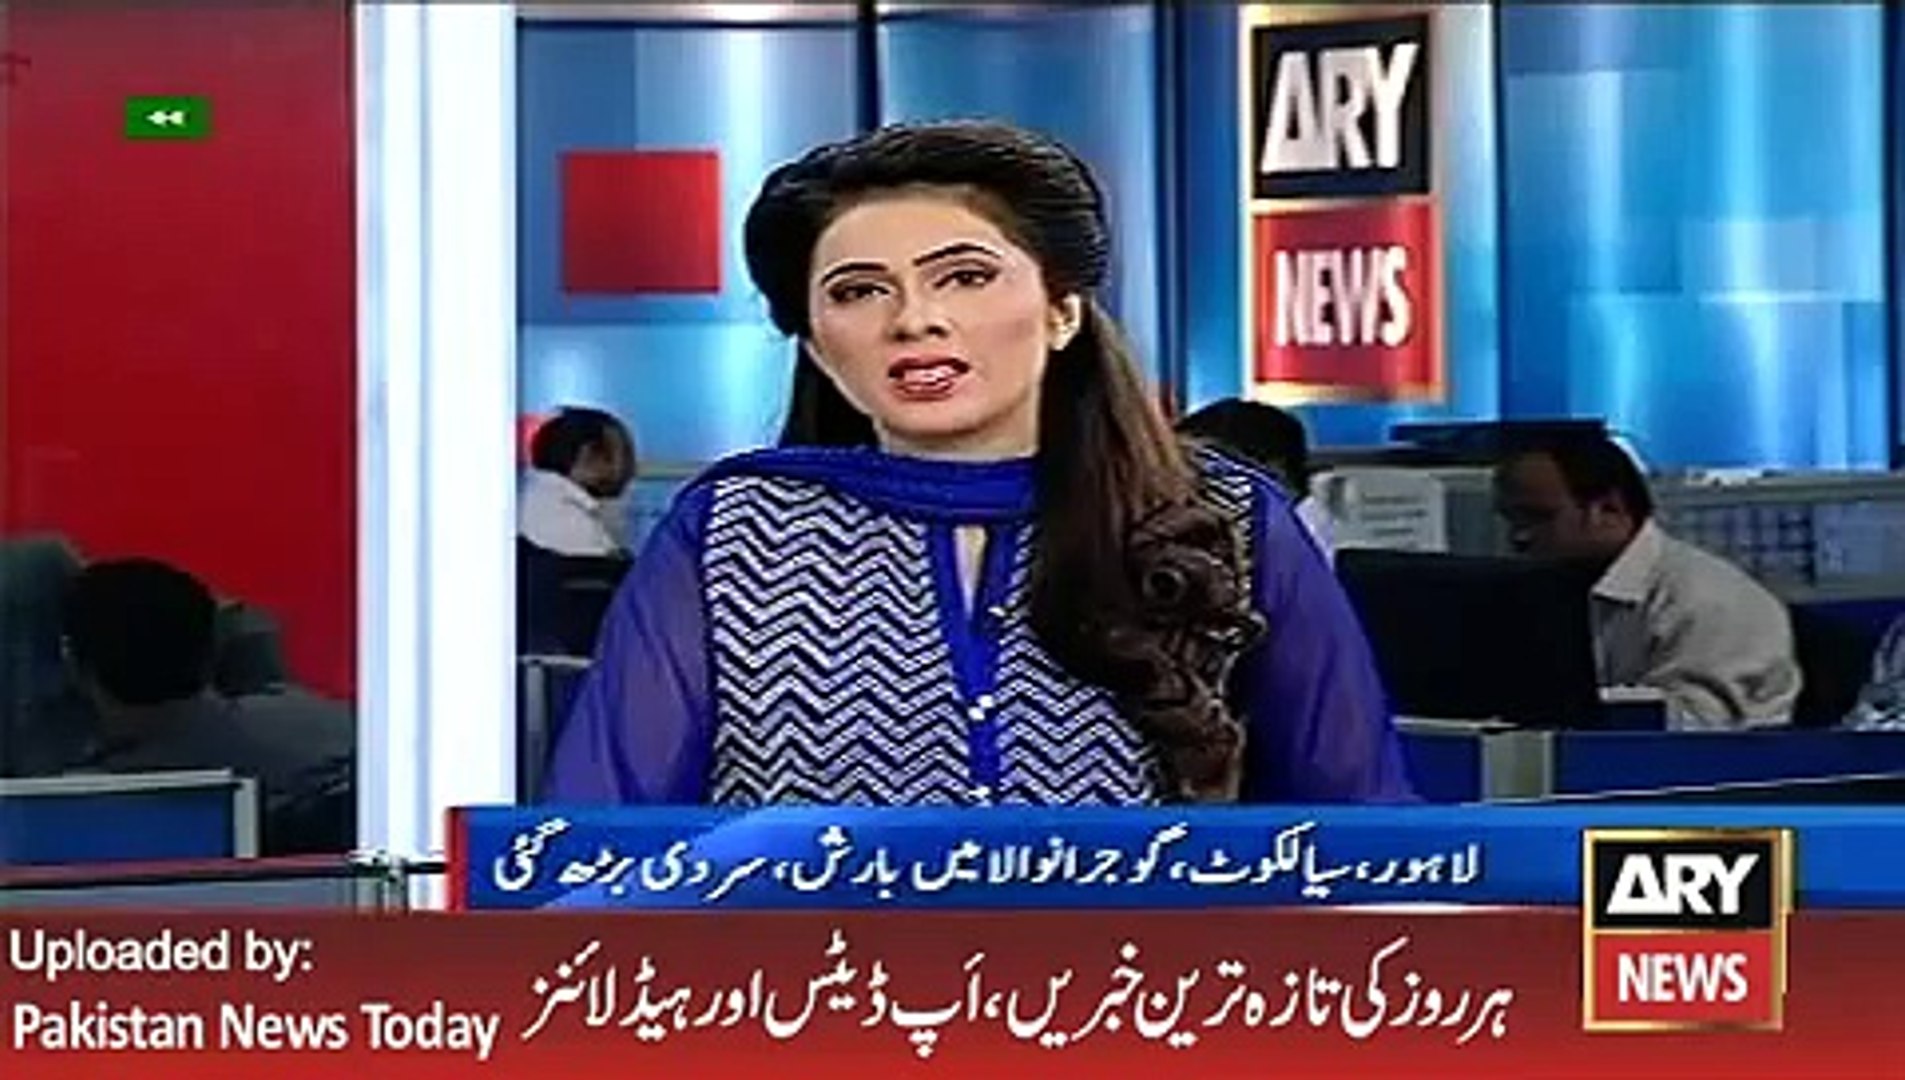 Latest News - ARY News Headlines 13 January 2016, Weather and Snow fall updates